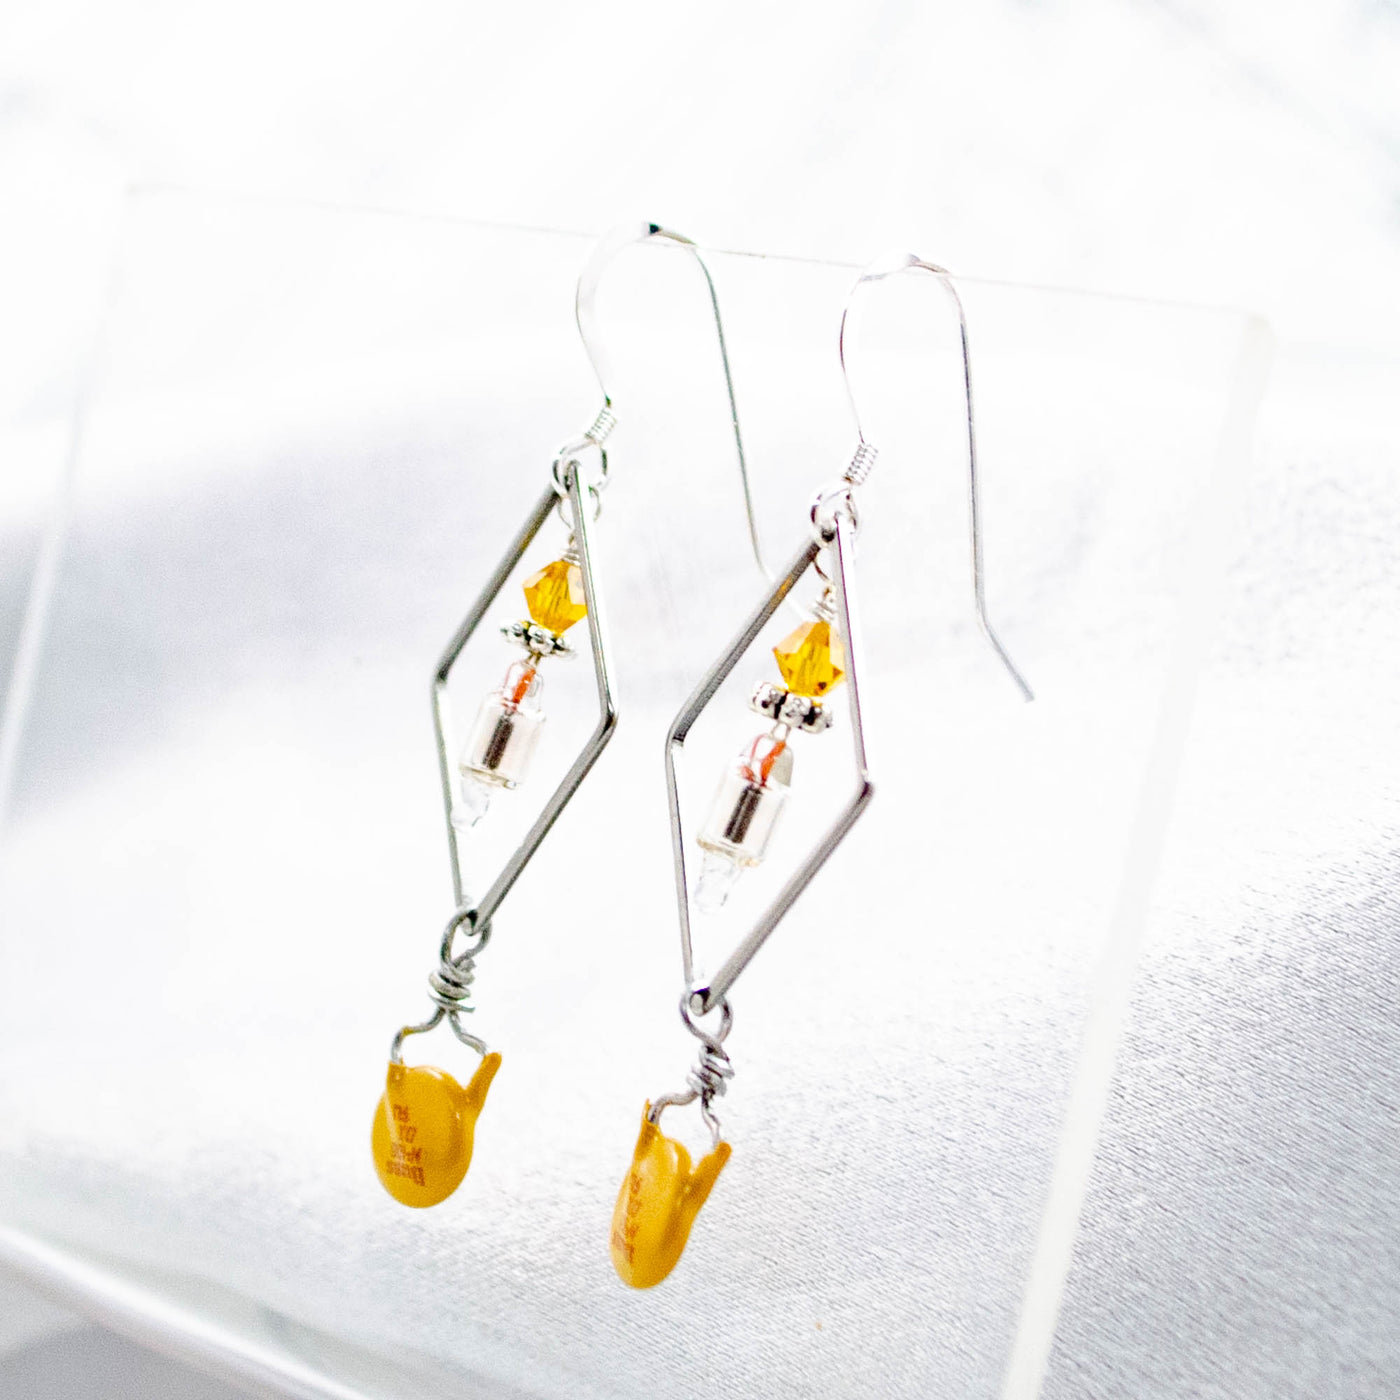 Electronic Component Earrings - Capacitors and Diodes